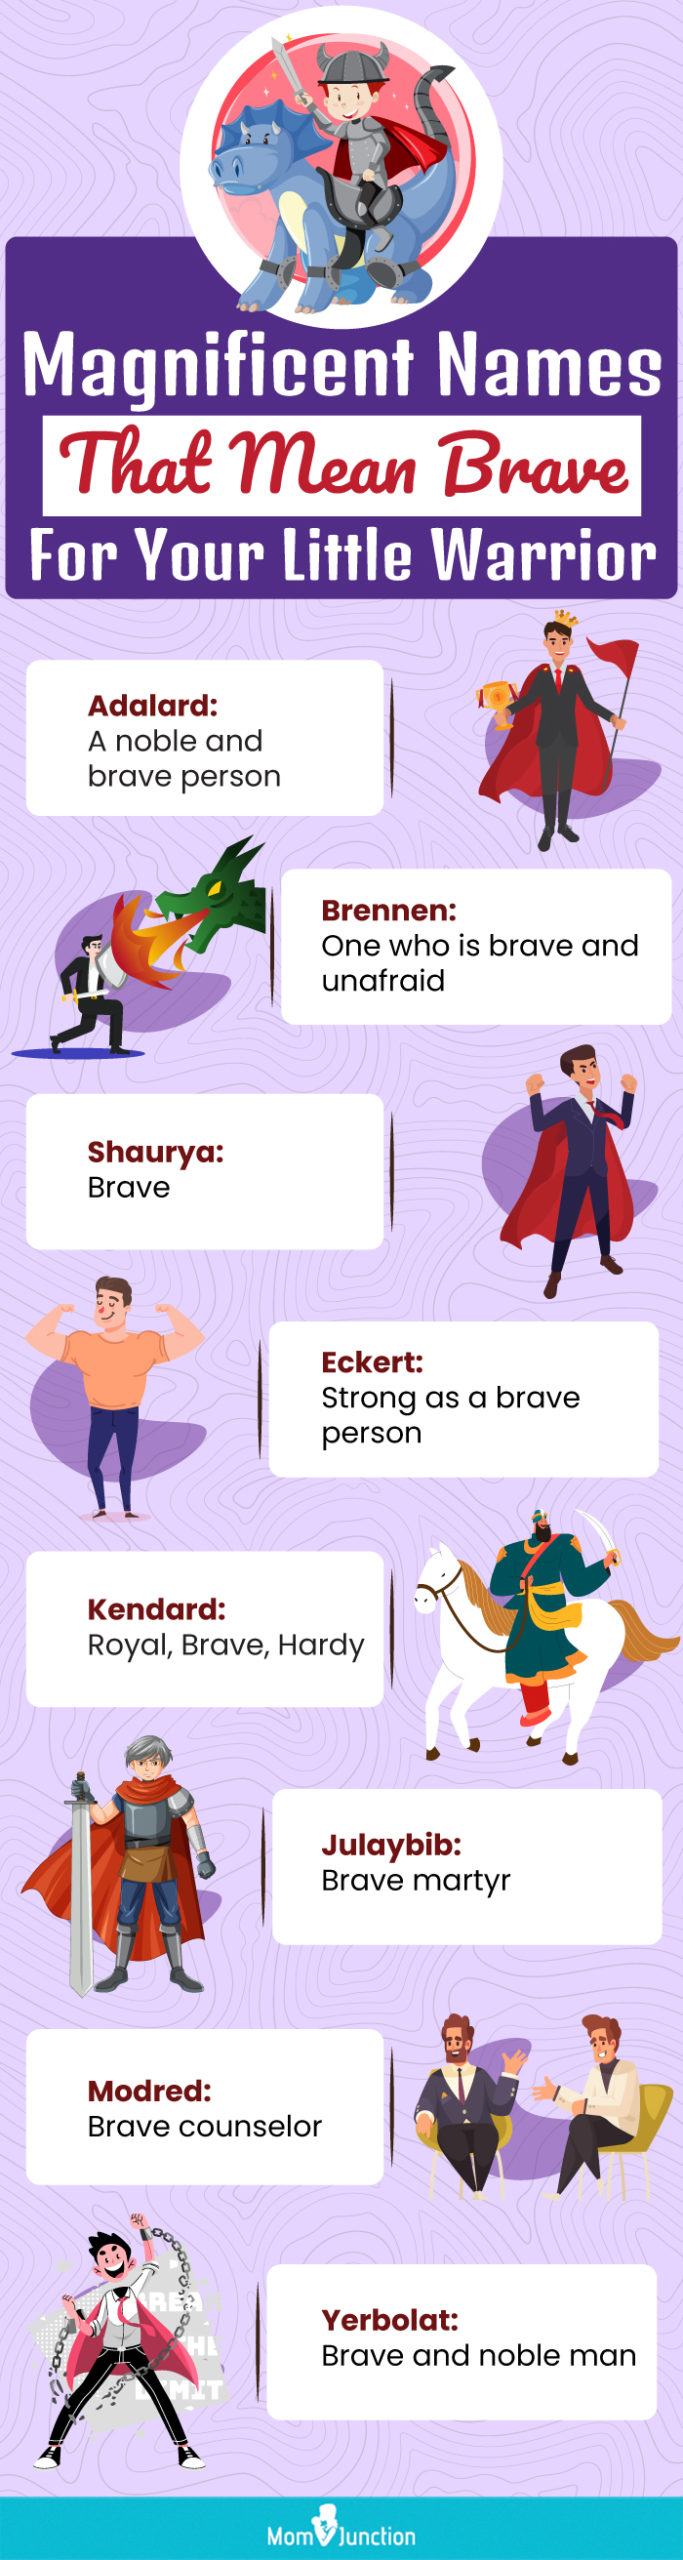 magnificent names that mean brave for your little warrior (infographic)